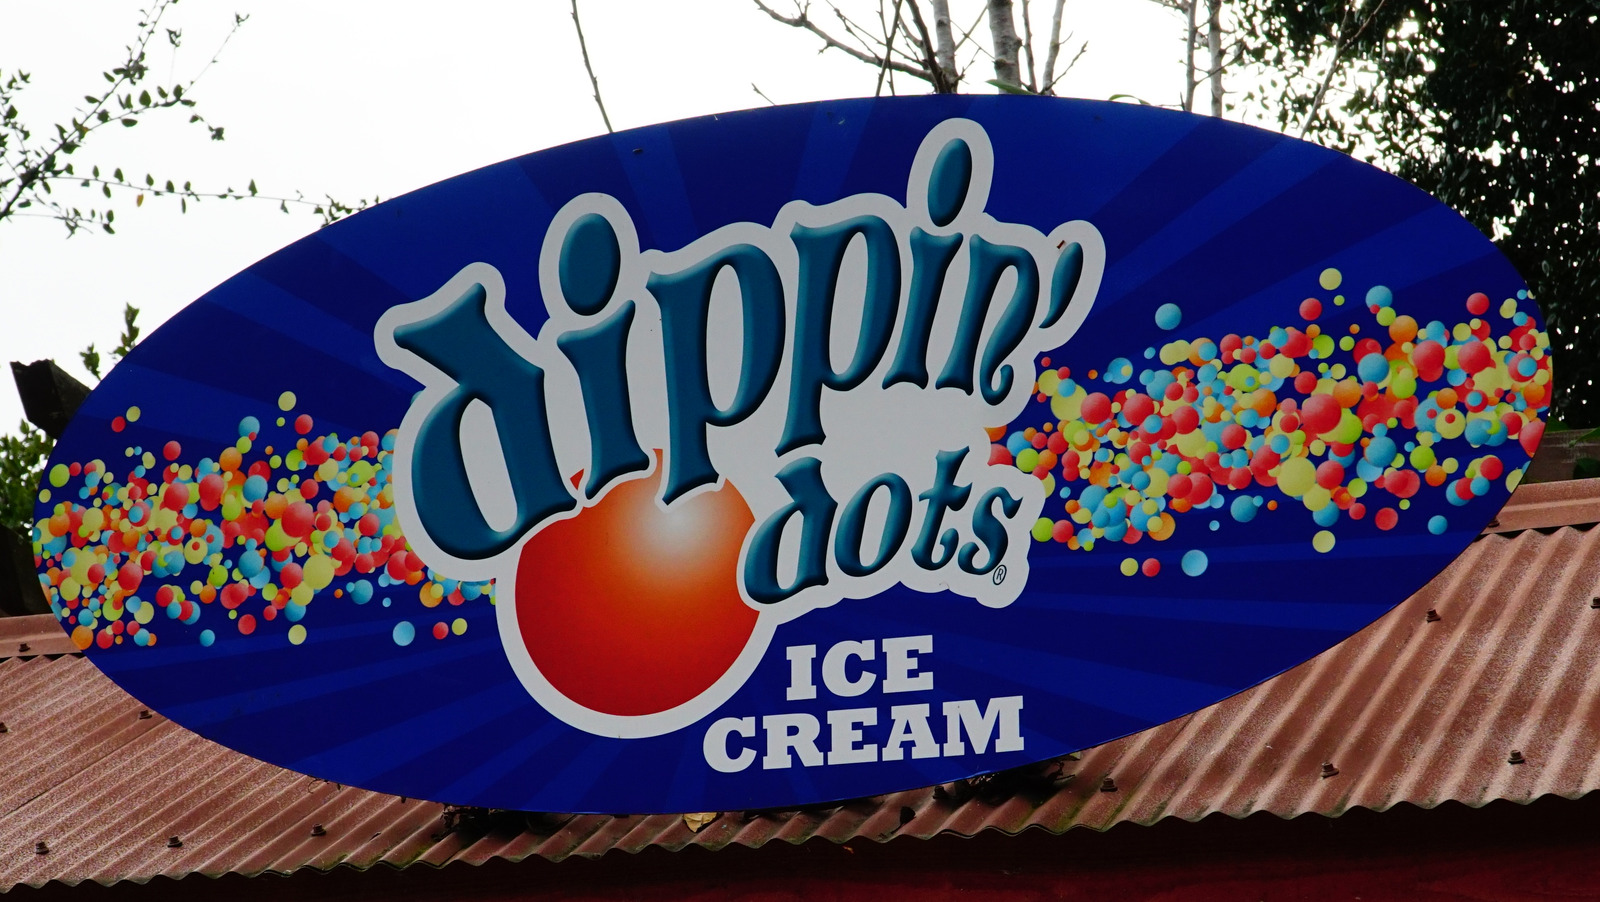 Oklahoma owner of Dippin' Dots settles legal dispute